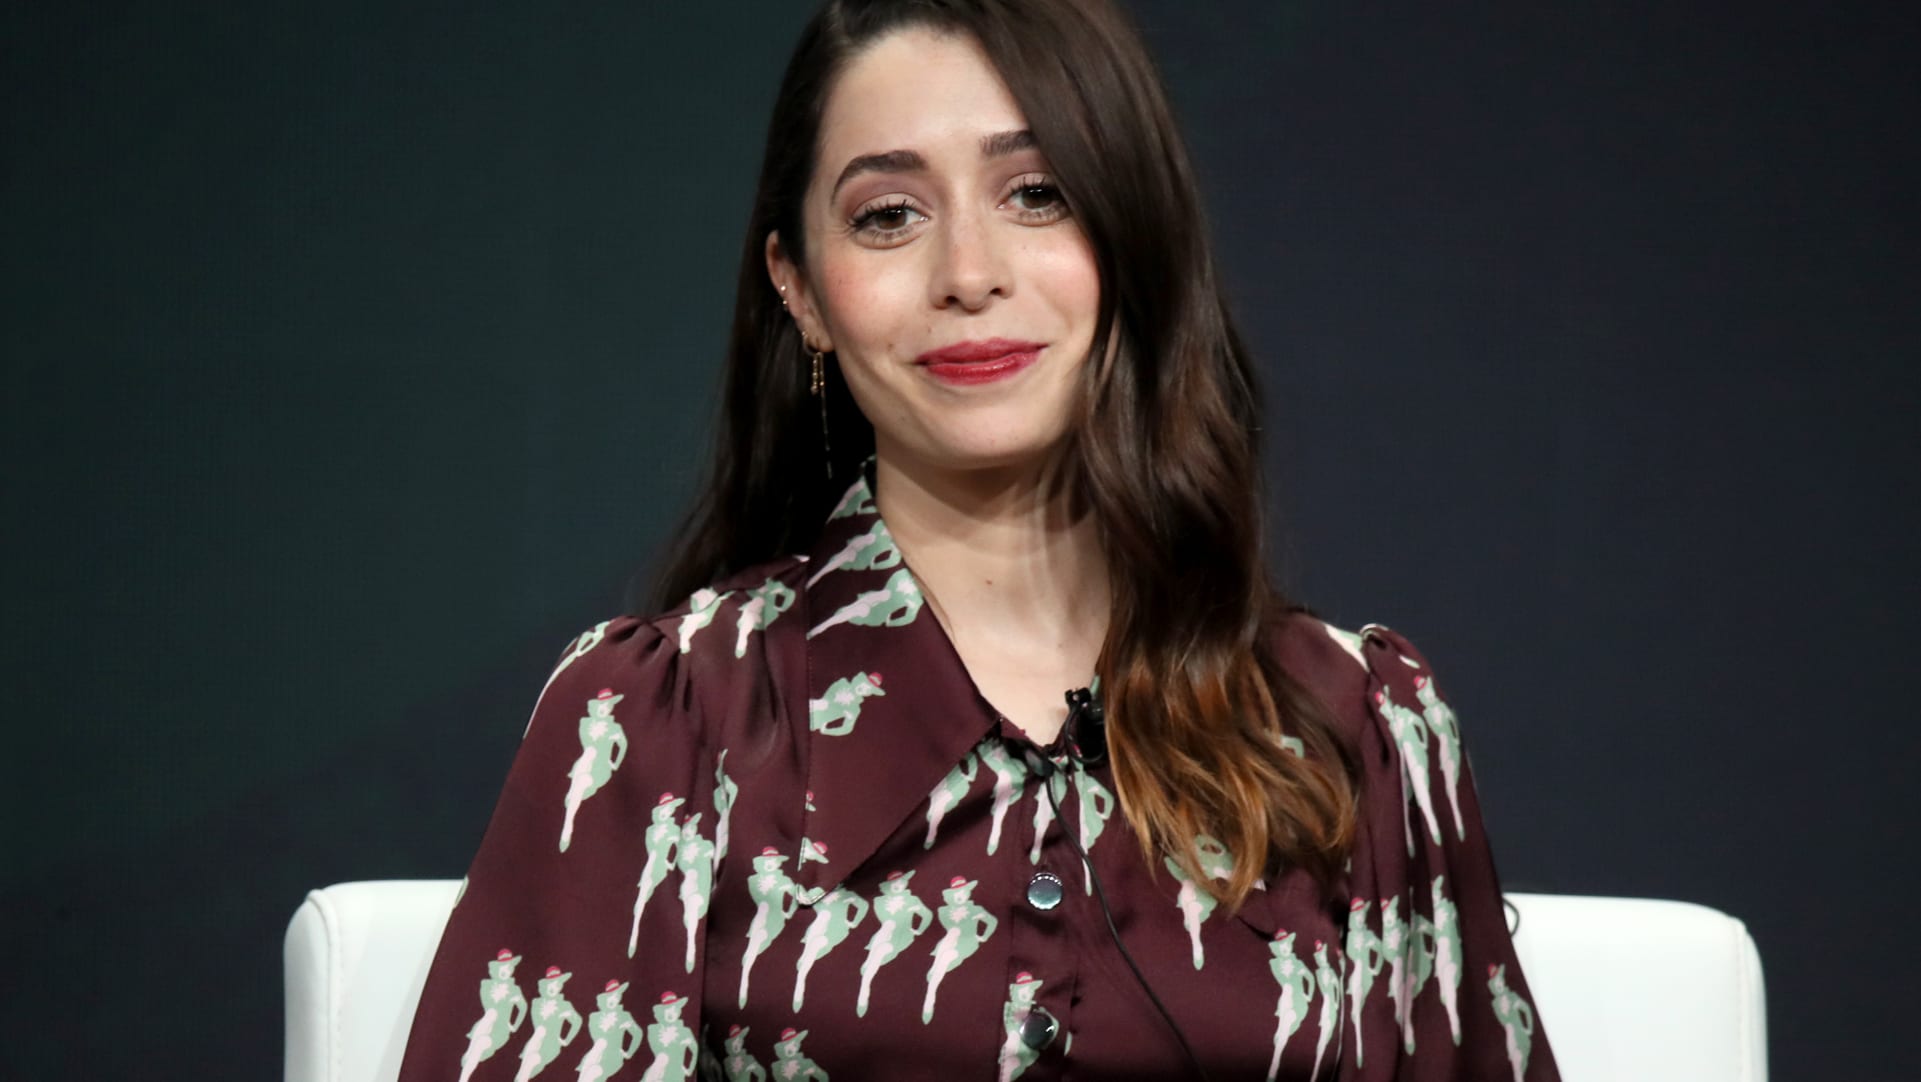 The Penguin HBO Max Series With Colin Farrell Casts Cristin Milioti